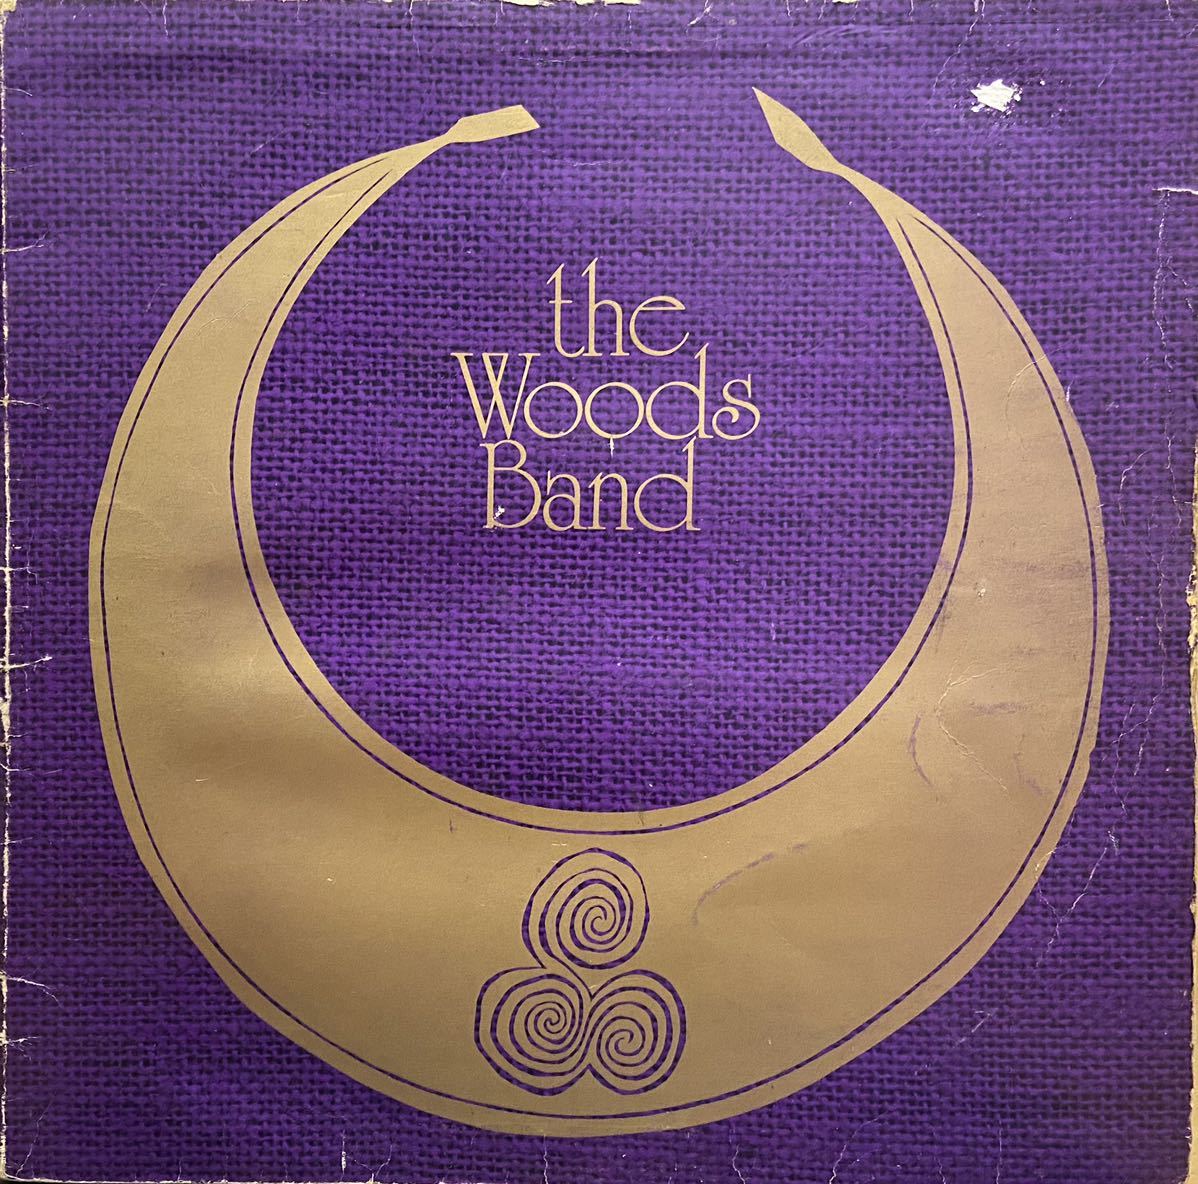 『THE WOODS BAND / THE WOODS BAND』アイリッシュフォークロック大名盤 GAY&TERRY WOODS 激レアな英国ORIG_画像1